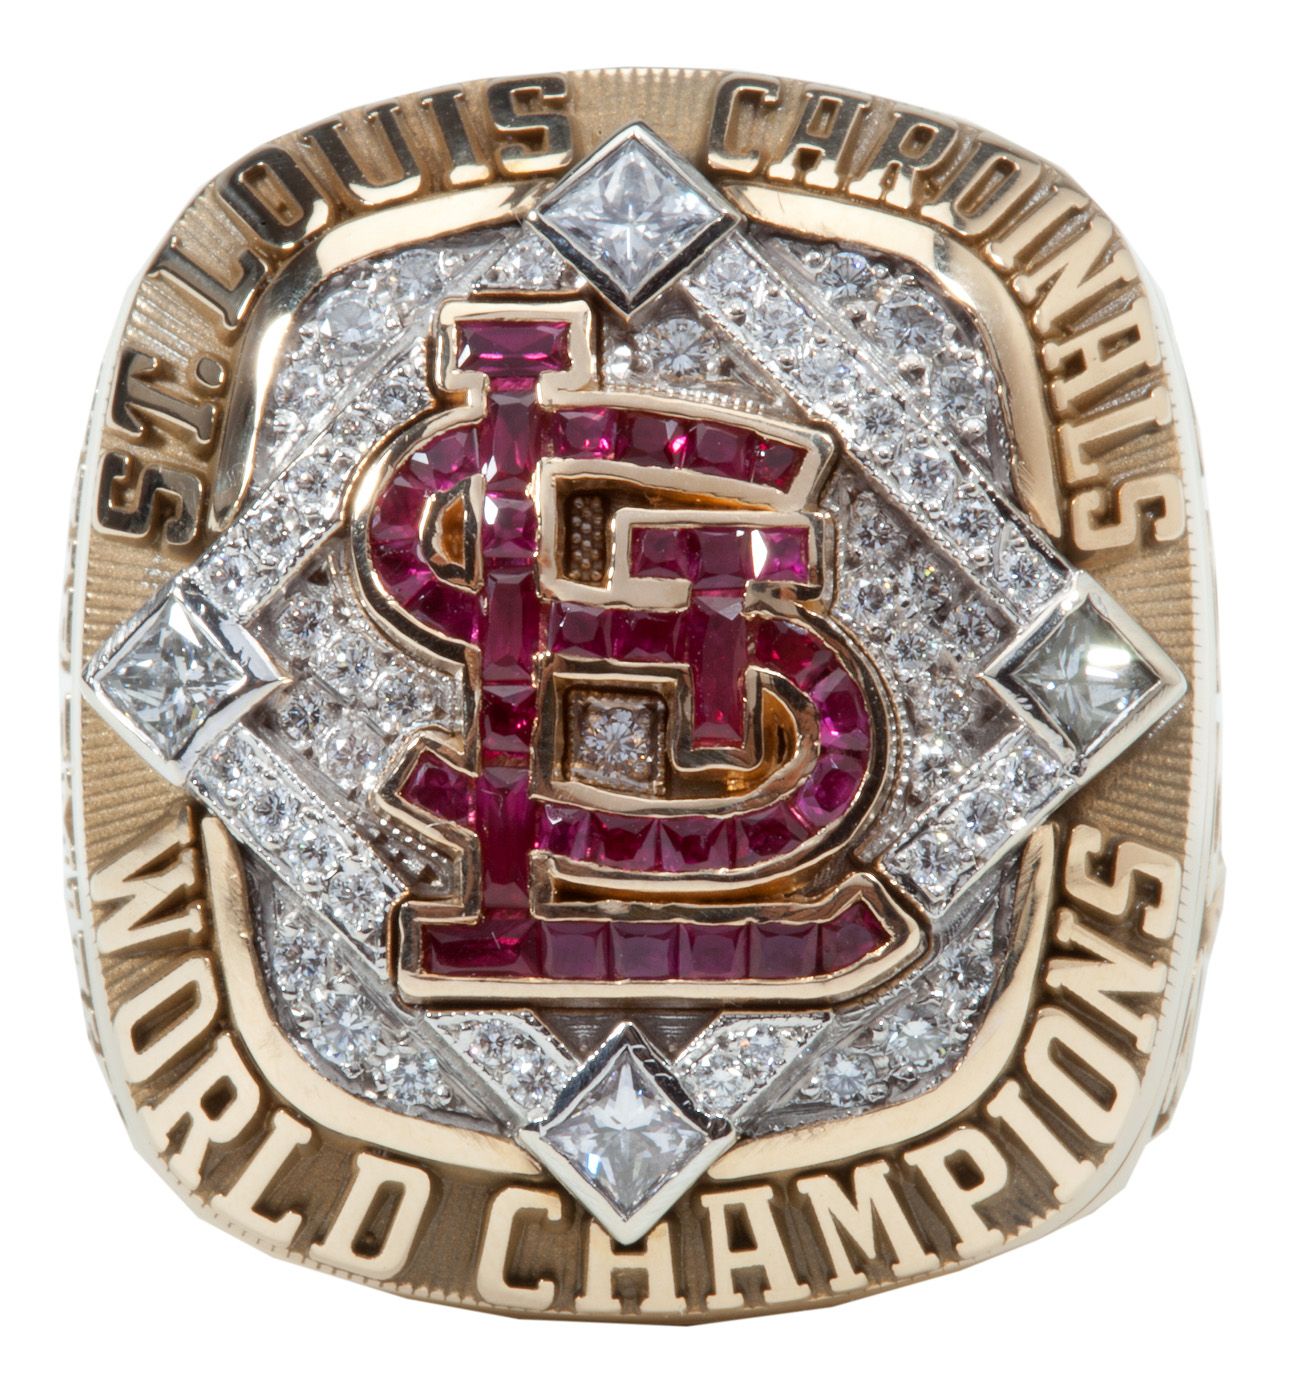 Sell or Auction a 2006 St Louis Cardinals World Series Championship Ring